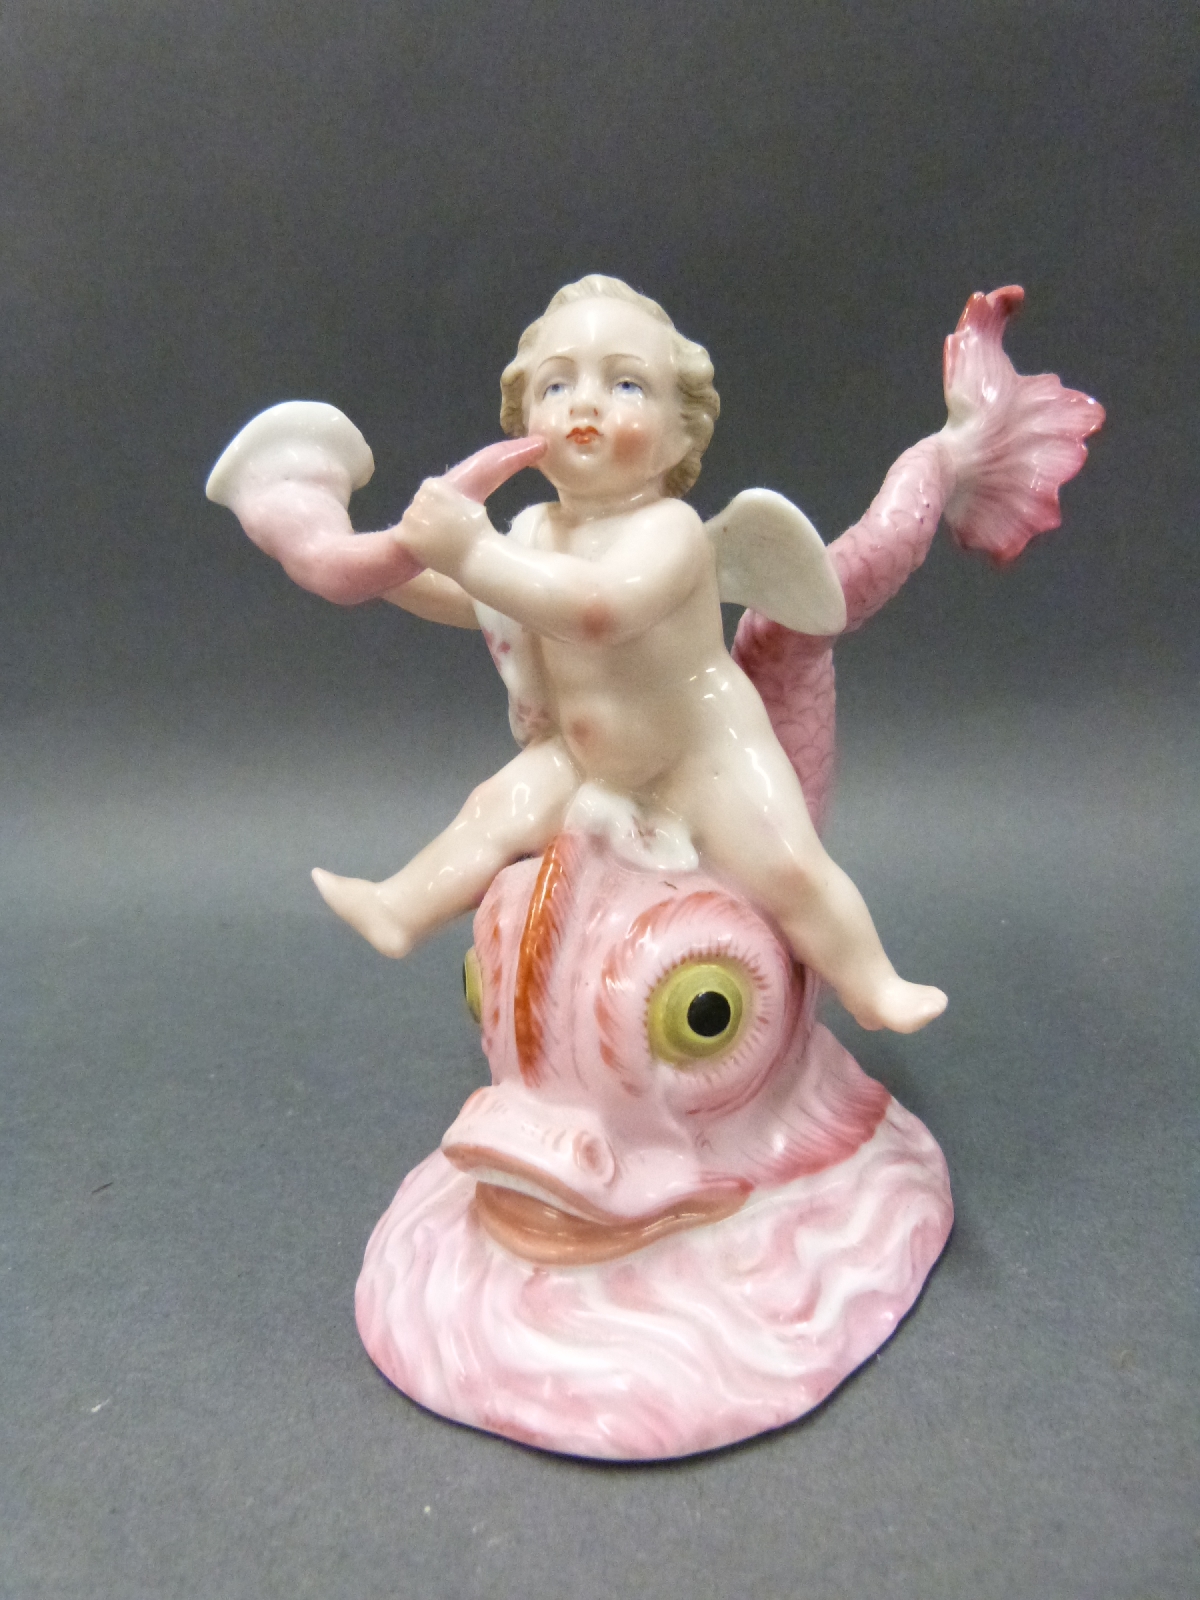 Royal Doulton figurine Amy, signed by the artist, signed Continental majolica, - Image 5 of 5